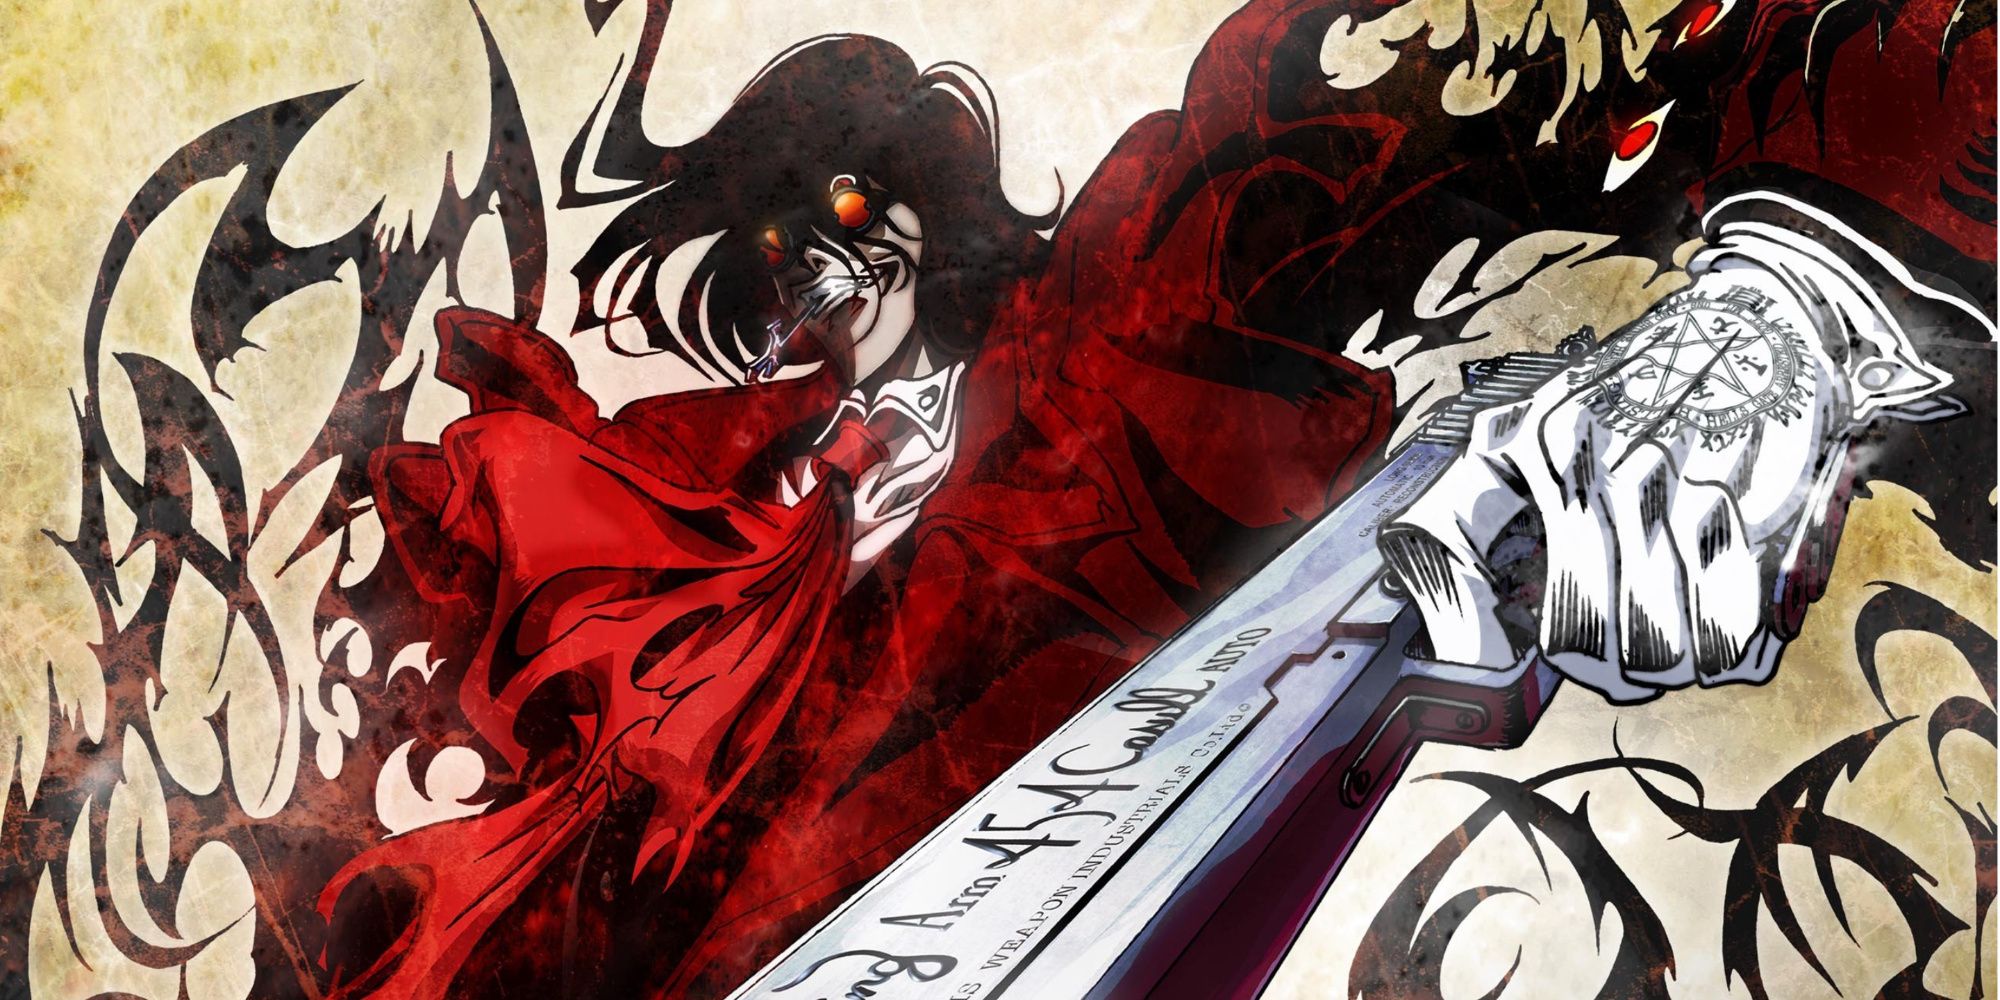 Hellsing Ultimate cover image, Alucard holding gun while grinning